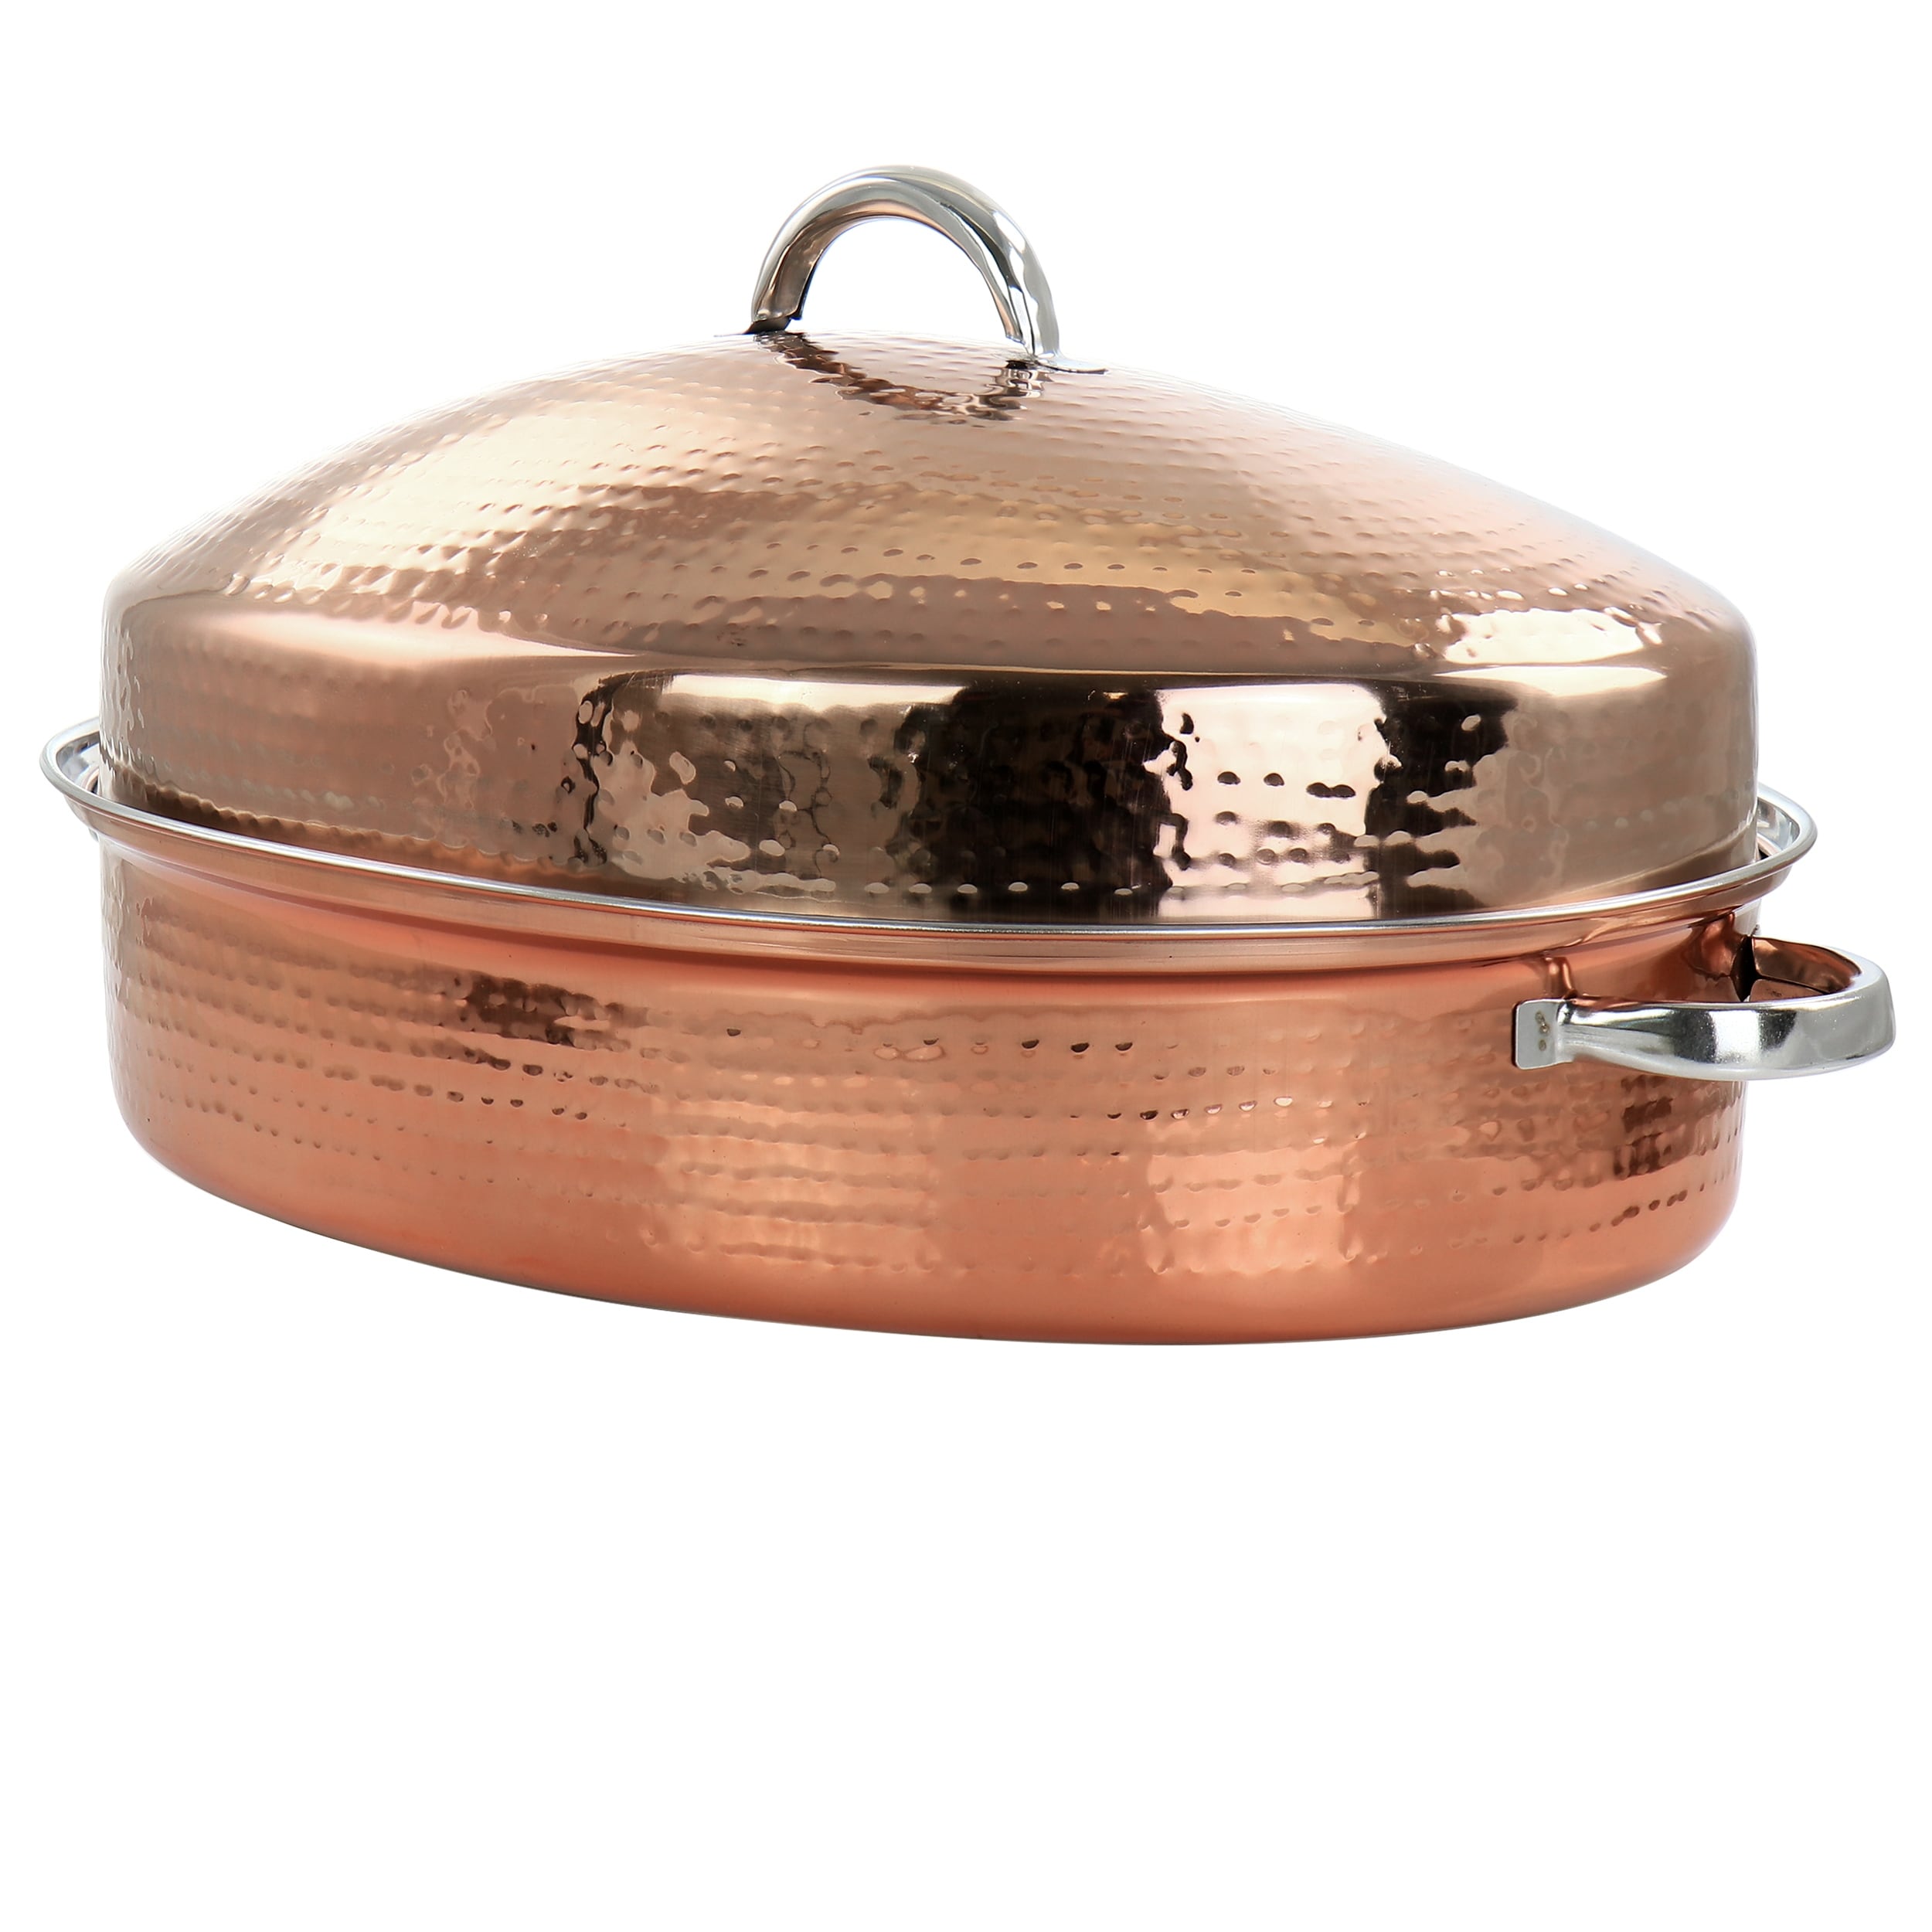 Cuisinart 17-inch x 13-inch Non-Stick Roaster with V-Rack